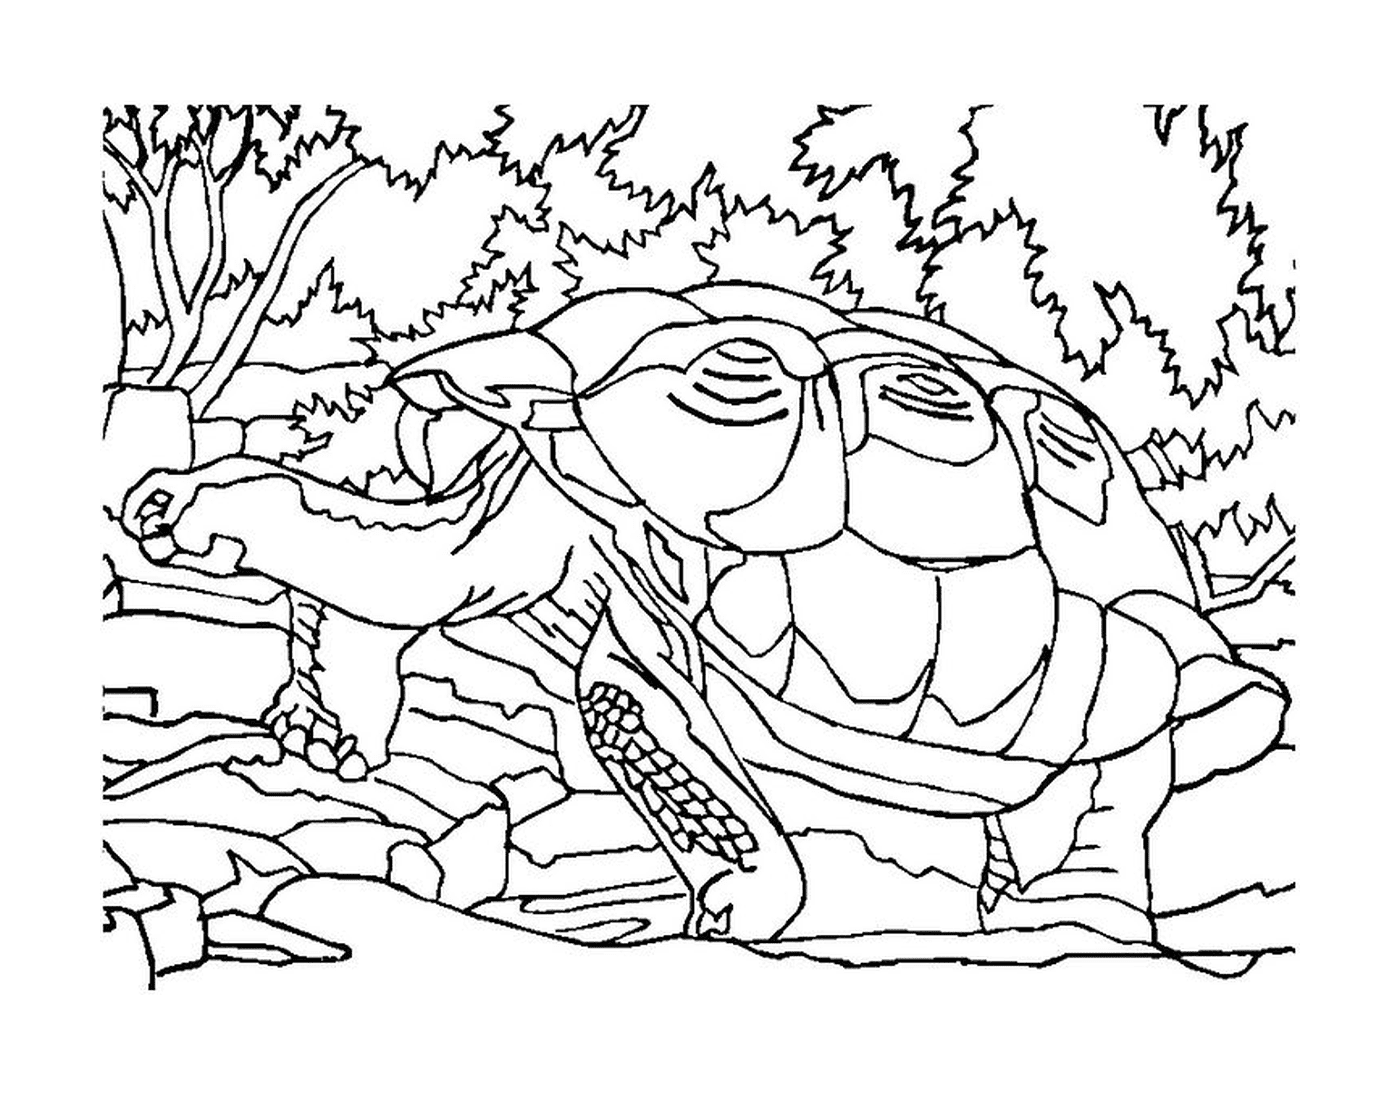  Turtle in the forest 